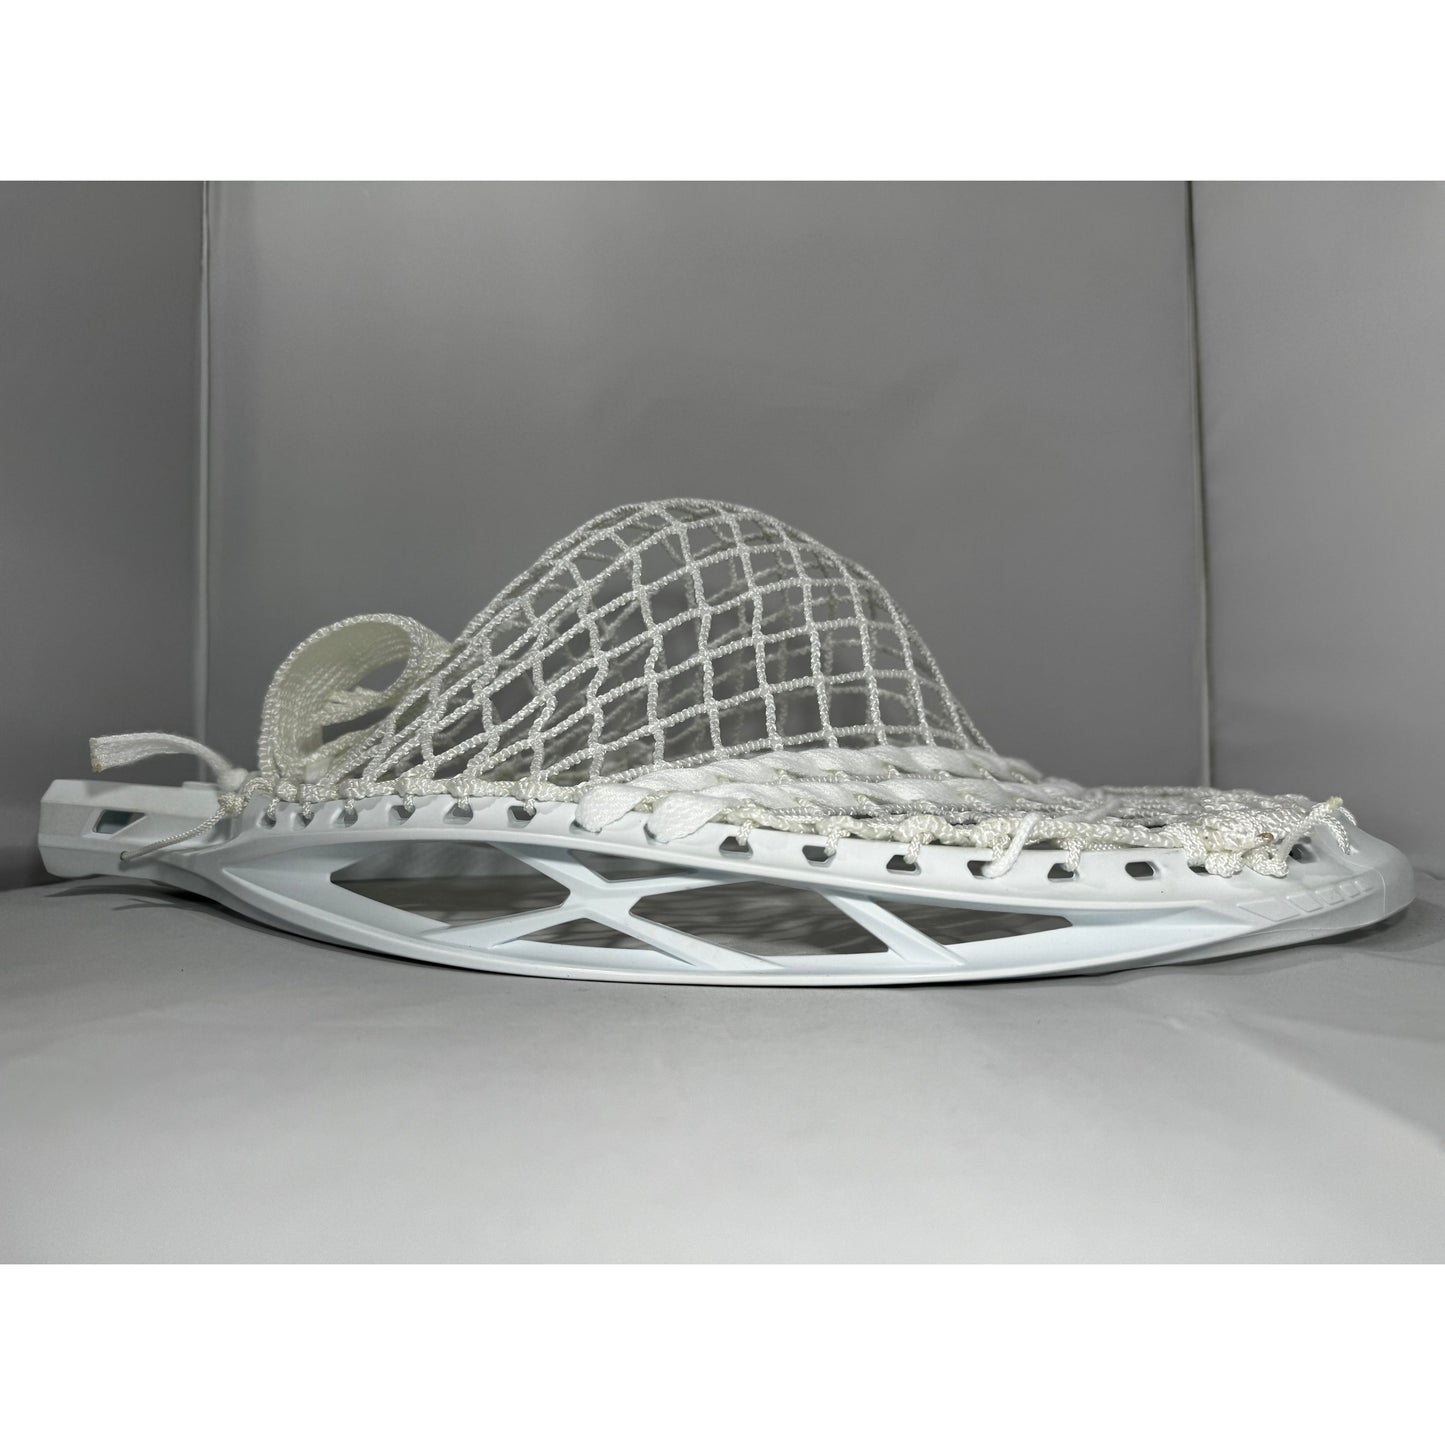 Custom Monopoly Dyed STX Lacrosse Eclipse 3 Goalie Head with 11D Eclipse Mesh